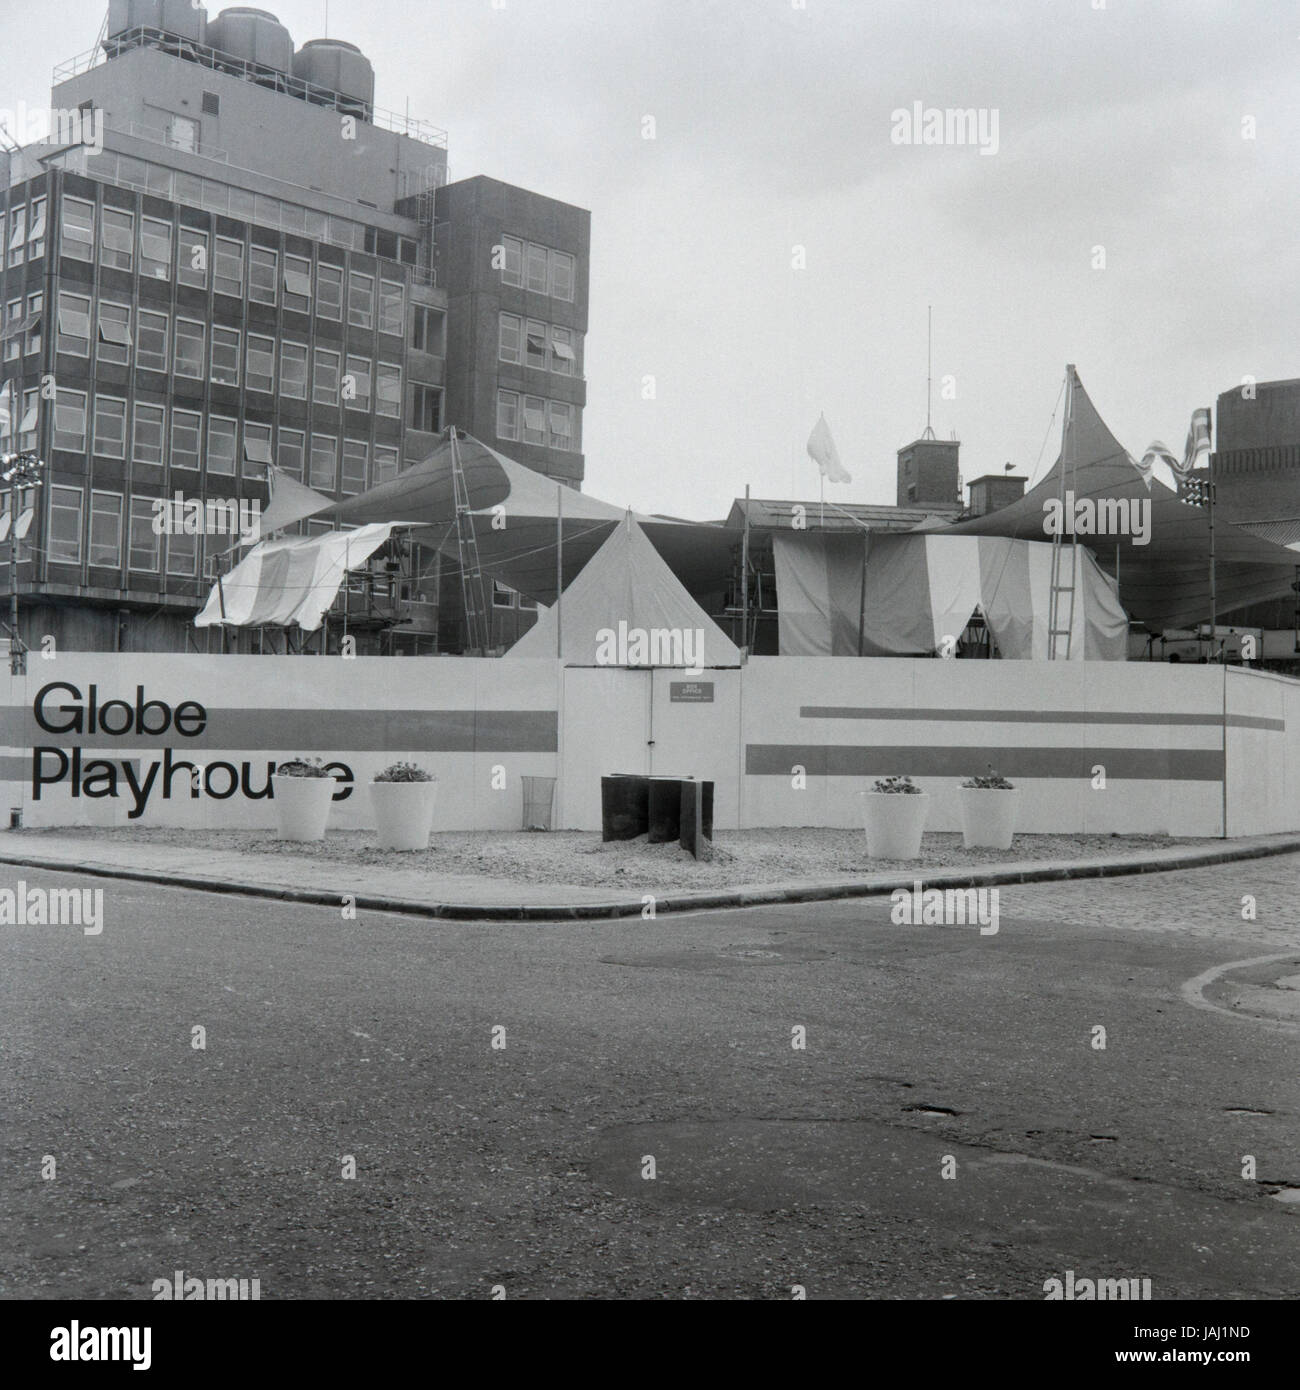 The site of the Globe Playhouse theatre in London in 1972. The Sam Wanamaker Playhouse is an indoor theatre forming part of Shakespeare's Globe, along with the Globe Theatre on Bankside, London. Built making use of 17th-century plans for an indoor theatre, the playhouse recalls the layout and style of the Blackfriars Theatre, although it is not an exact reconstruction. Its shell was built during the construction of the Shakespeare's Globe complex, notable for the reconstruction of the open-air Globe Theatre of the same period. The shell was used as a space for education workshops and rehearsal Stock Photo